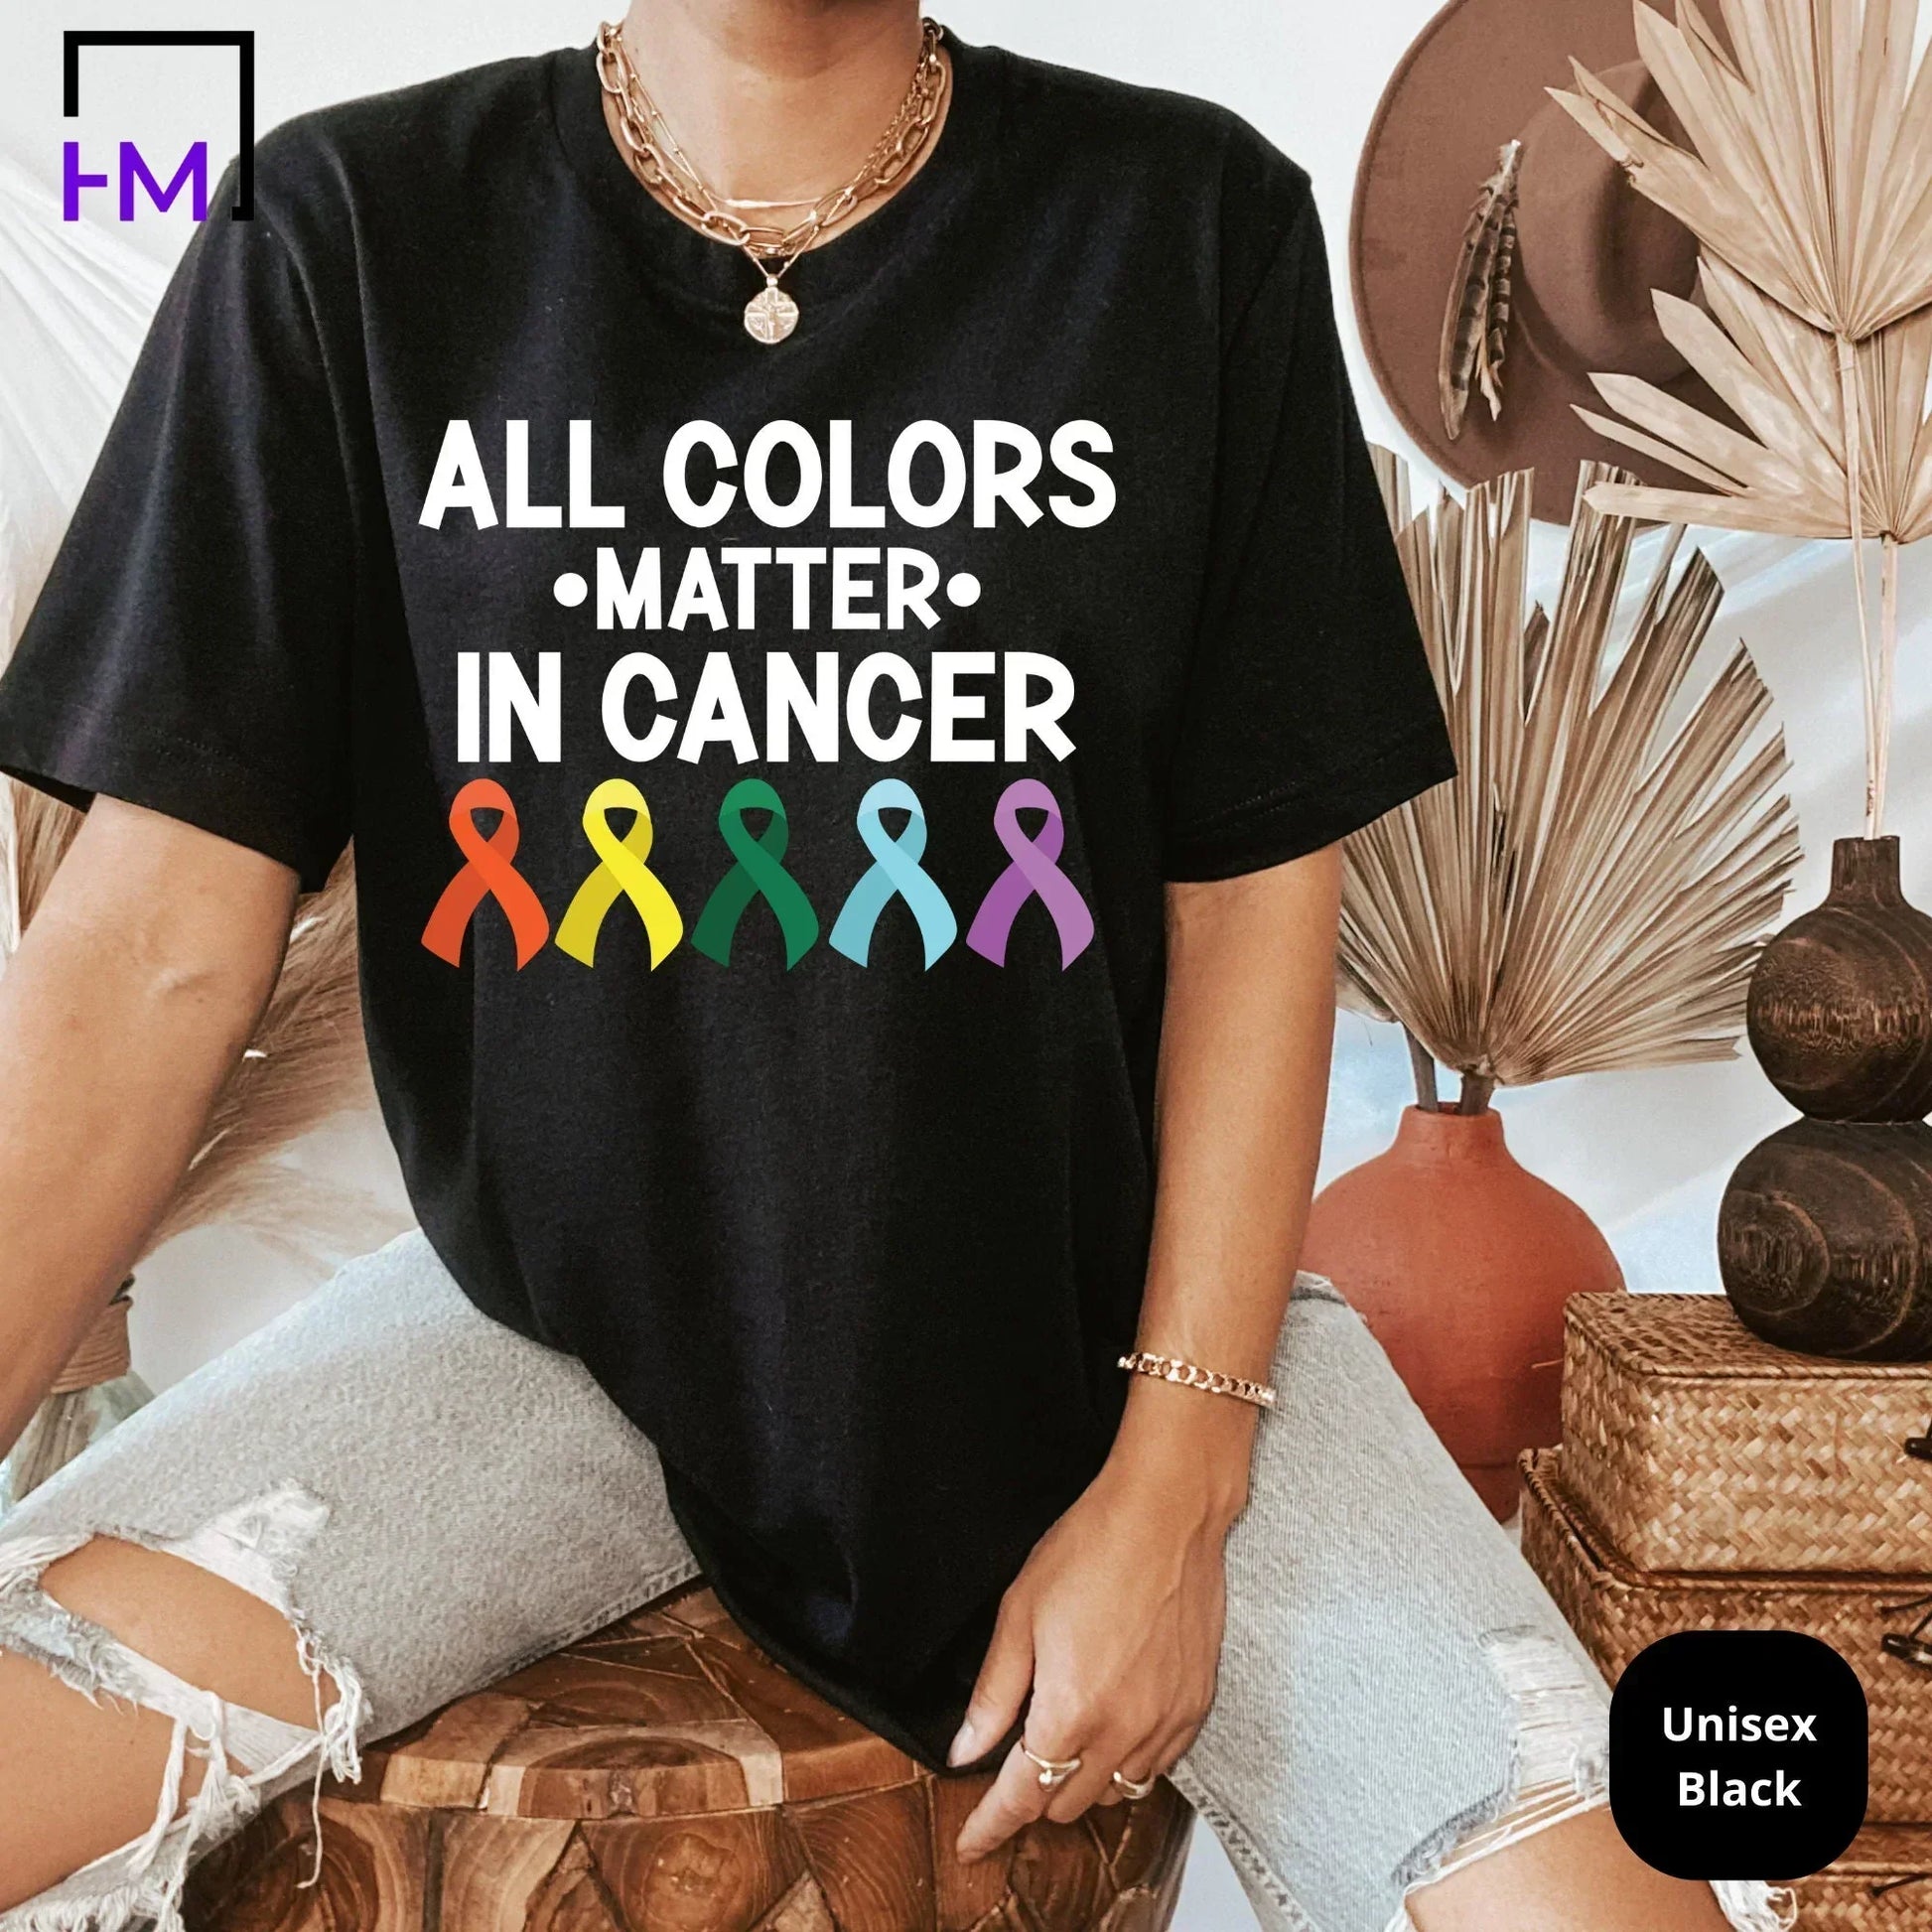 Fight Cancer in Every Color T-shirt, Colorful Cancer Awareness Gift, Cancer Ribbon Tee, Rainbow Ribbon Sweater, Cancer Support Sweatshirt HMDesignStudioUS